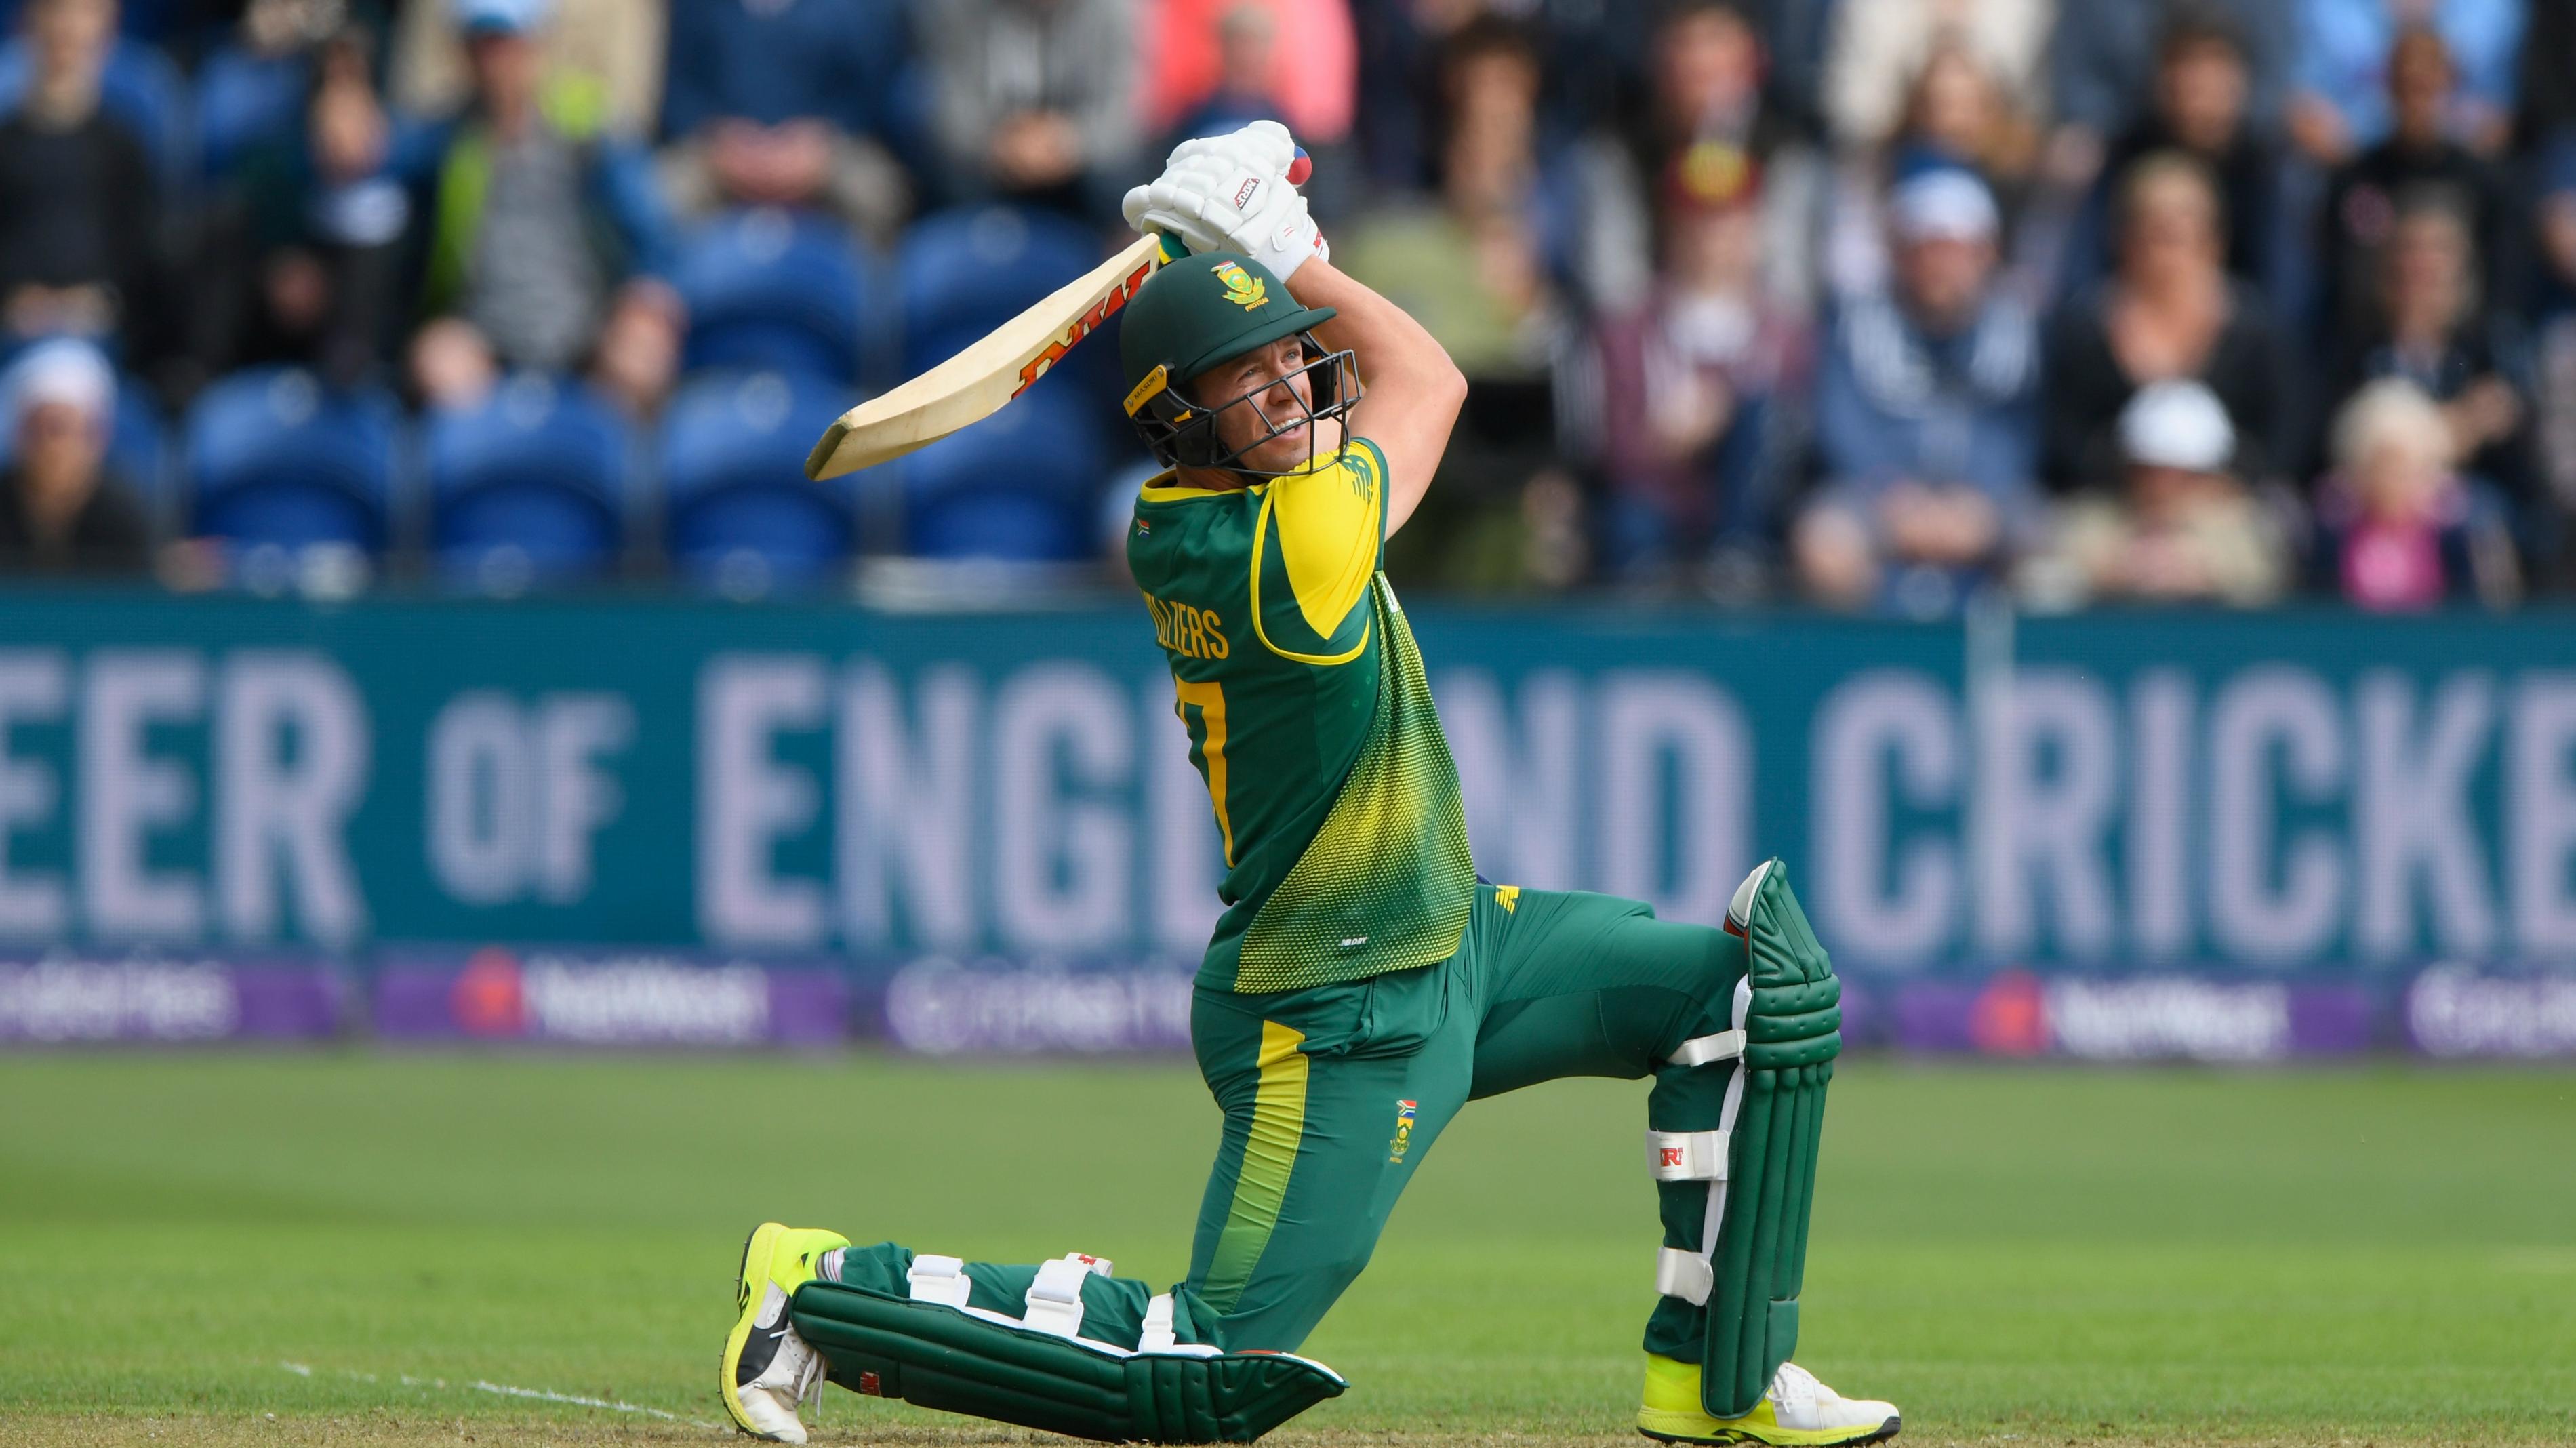 De Villiers announced his retirement from international cricket back in 2018 | Getty Images